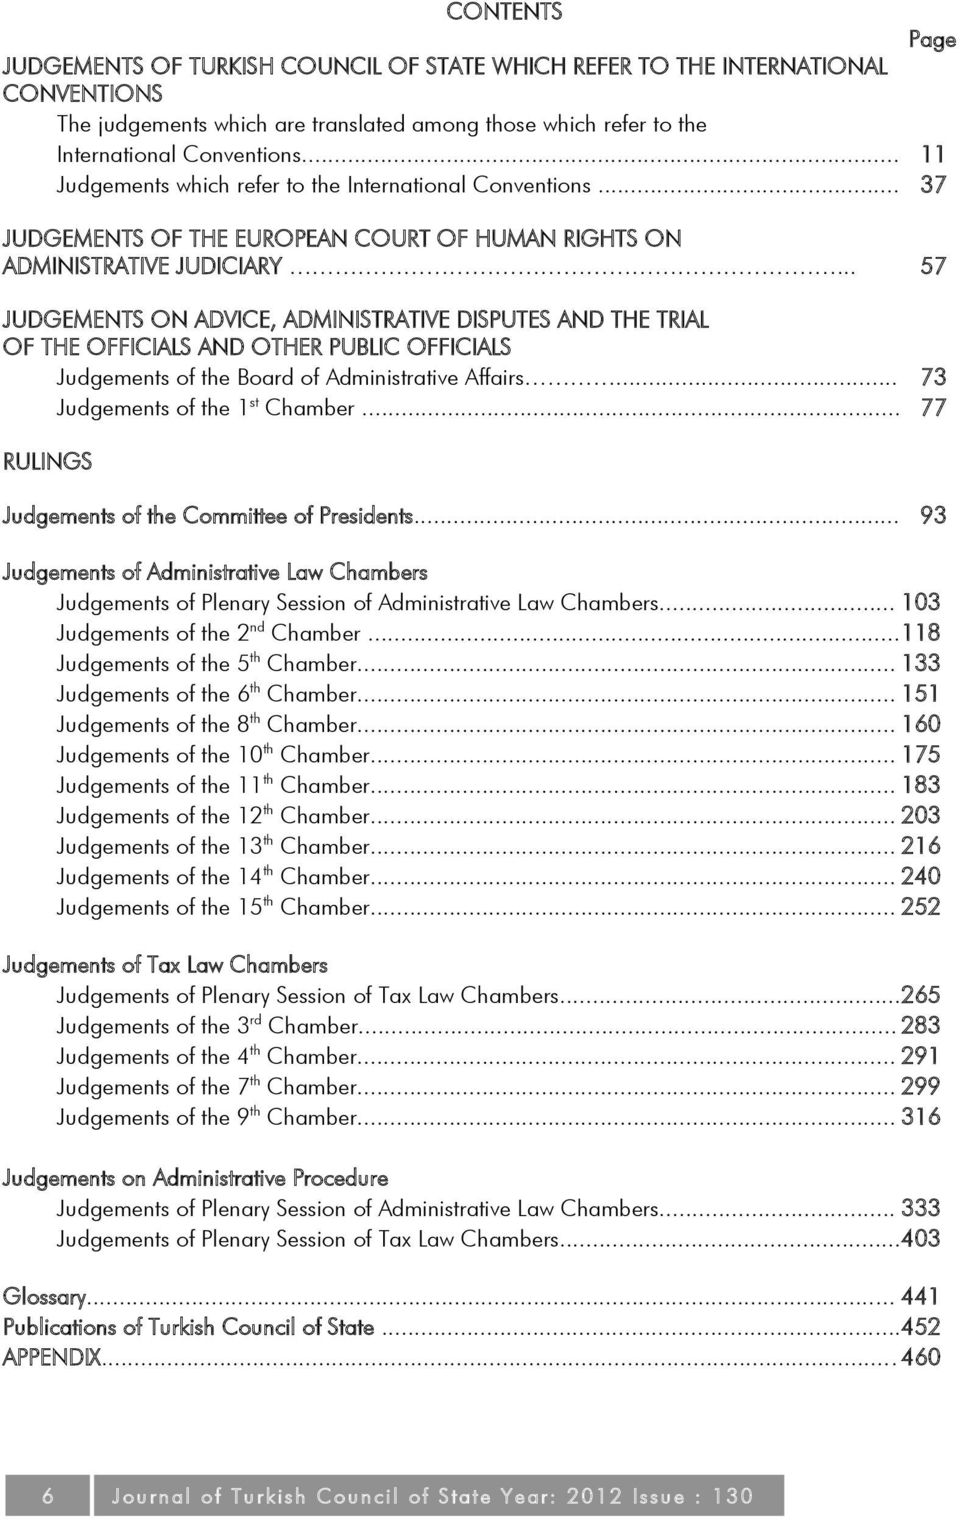 .. 57 JUDGEMENTS ON ADVICE, ADMINISTRATIVE DISPUTES AND THE TRIAL OF THE OFFICIALS AND OTHER PUBLIC OFFICIALS Judgements of the Board of Administrative Affairs... 73 Judgements of the 1 st Chamber.